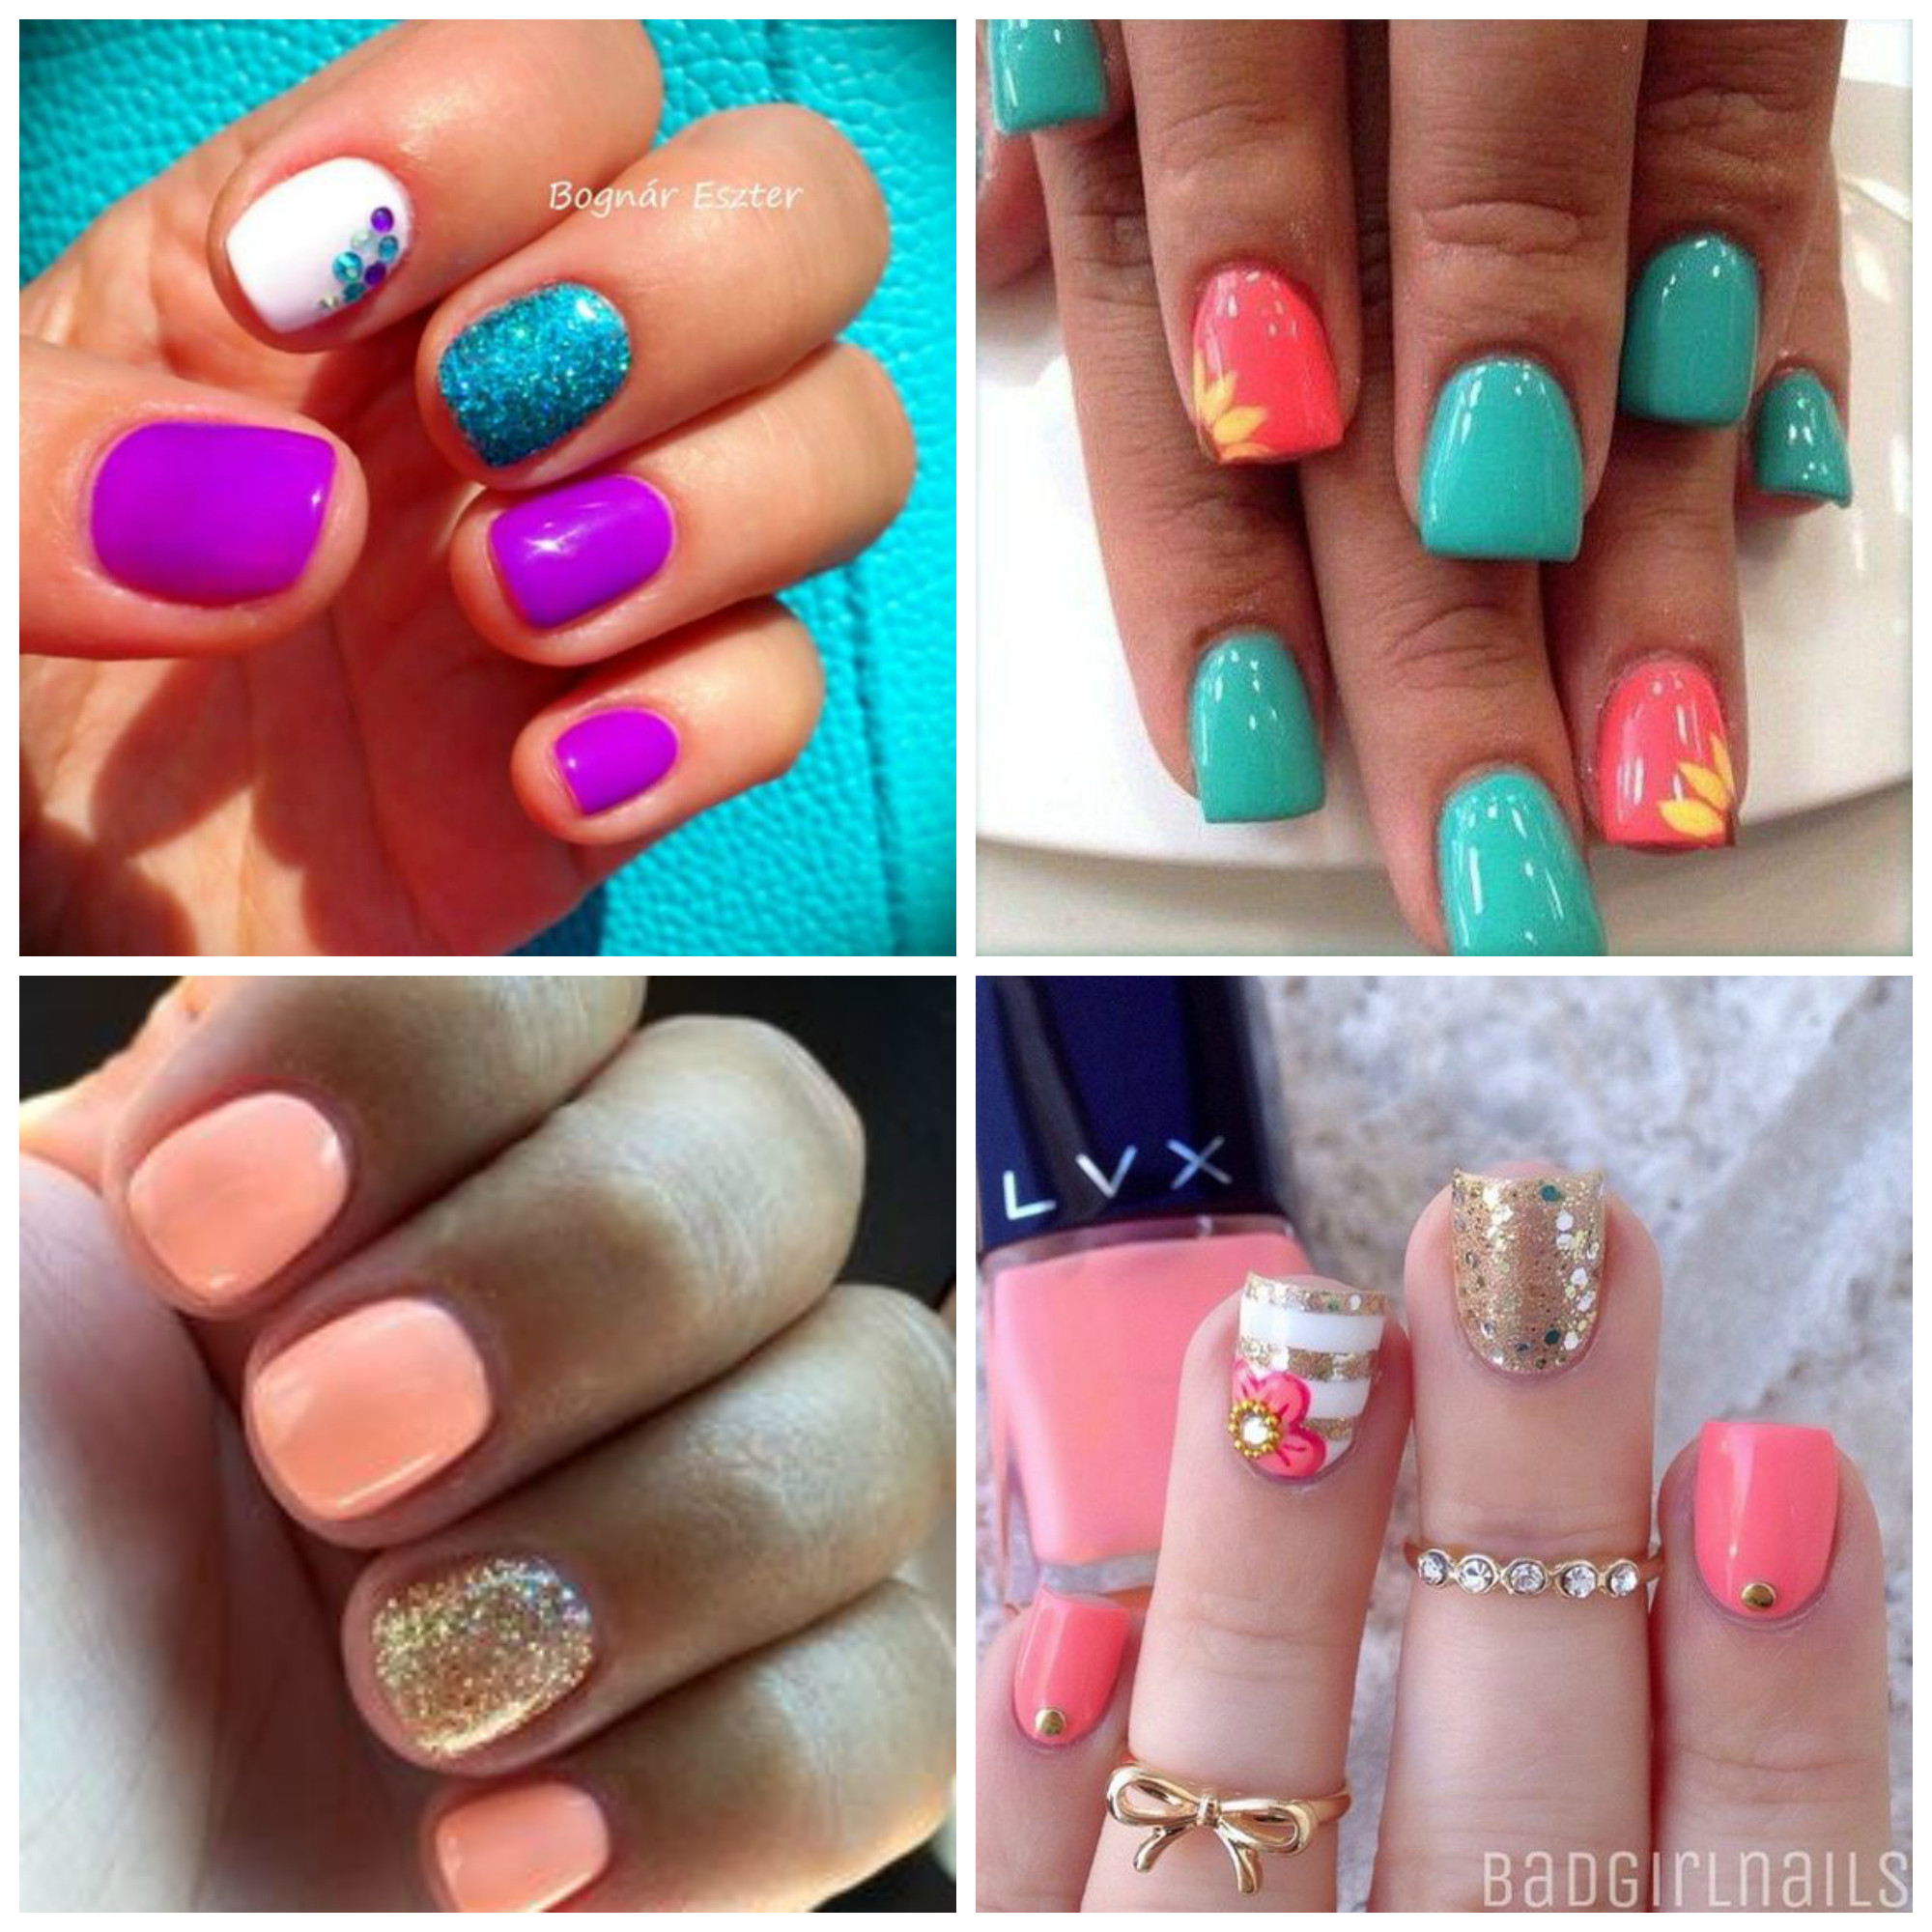 The Best Ideas for June Nail Colors Home, Family, Style and Art Ideas